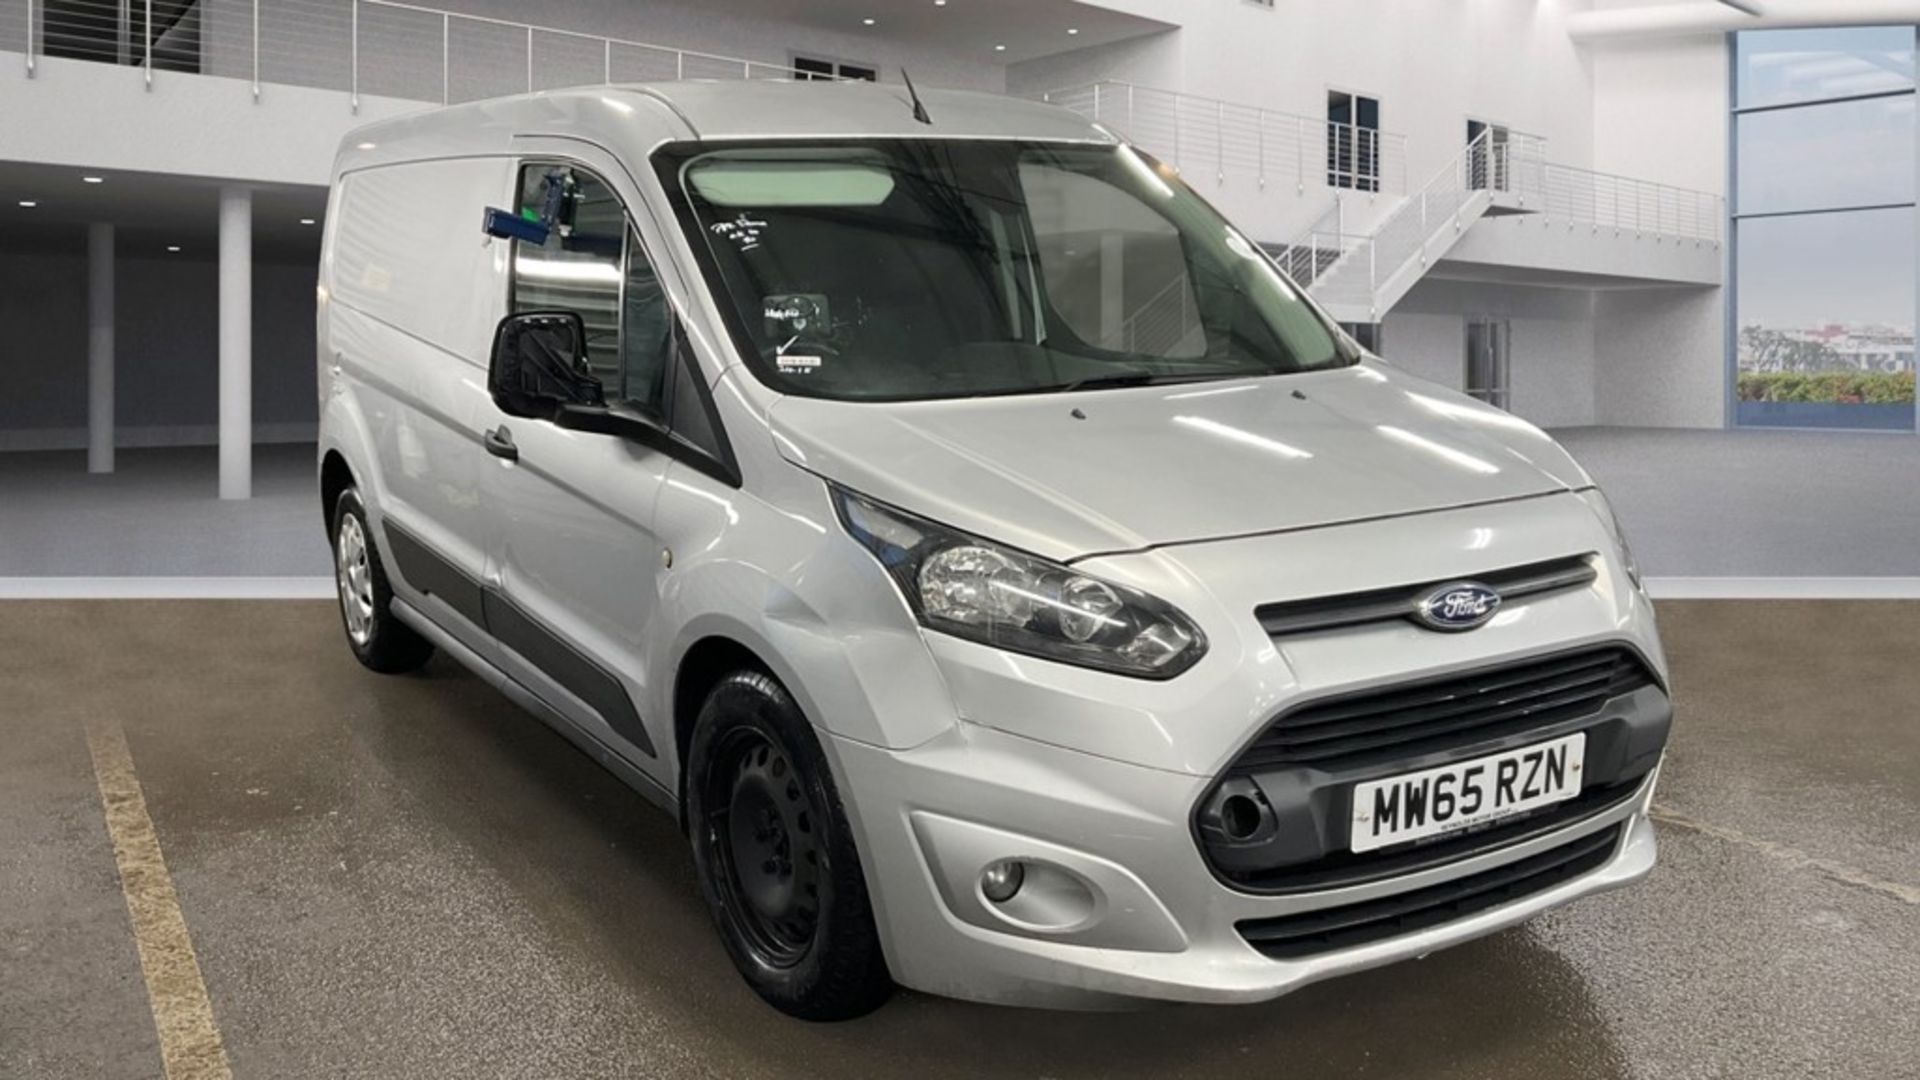 **ON SALE ** Ford Transit Connect 1.6 TDCI 95 240 L2H1 2015 -65 Reg' -Bluetooth Handsfree -Tow Bar